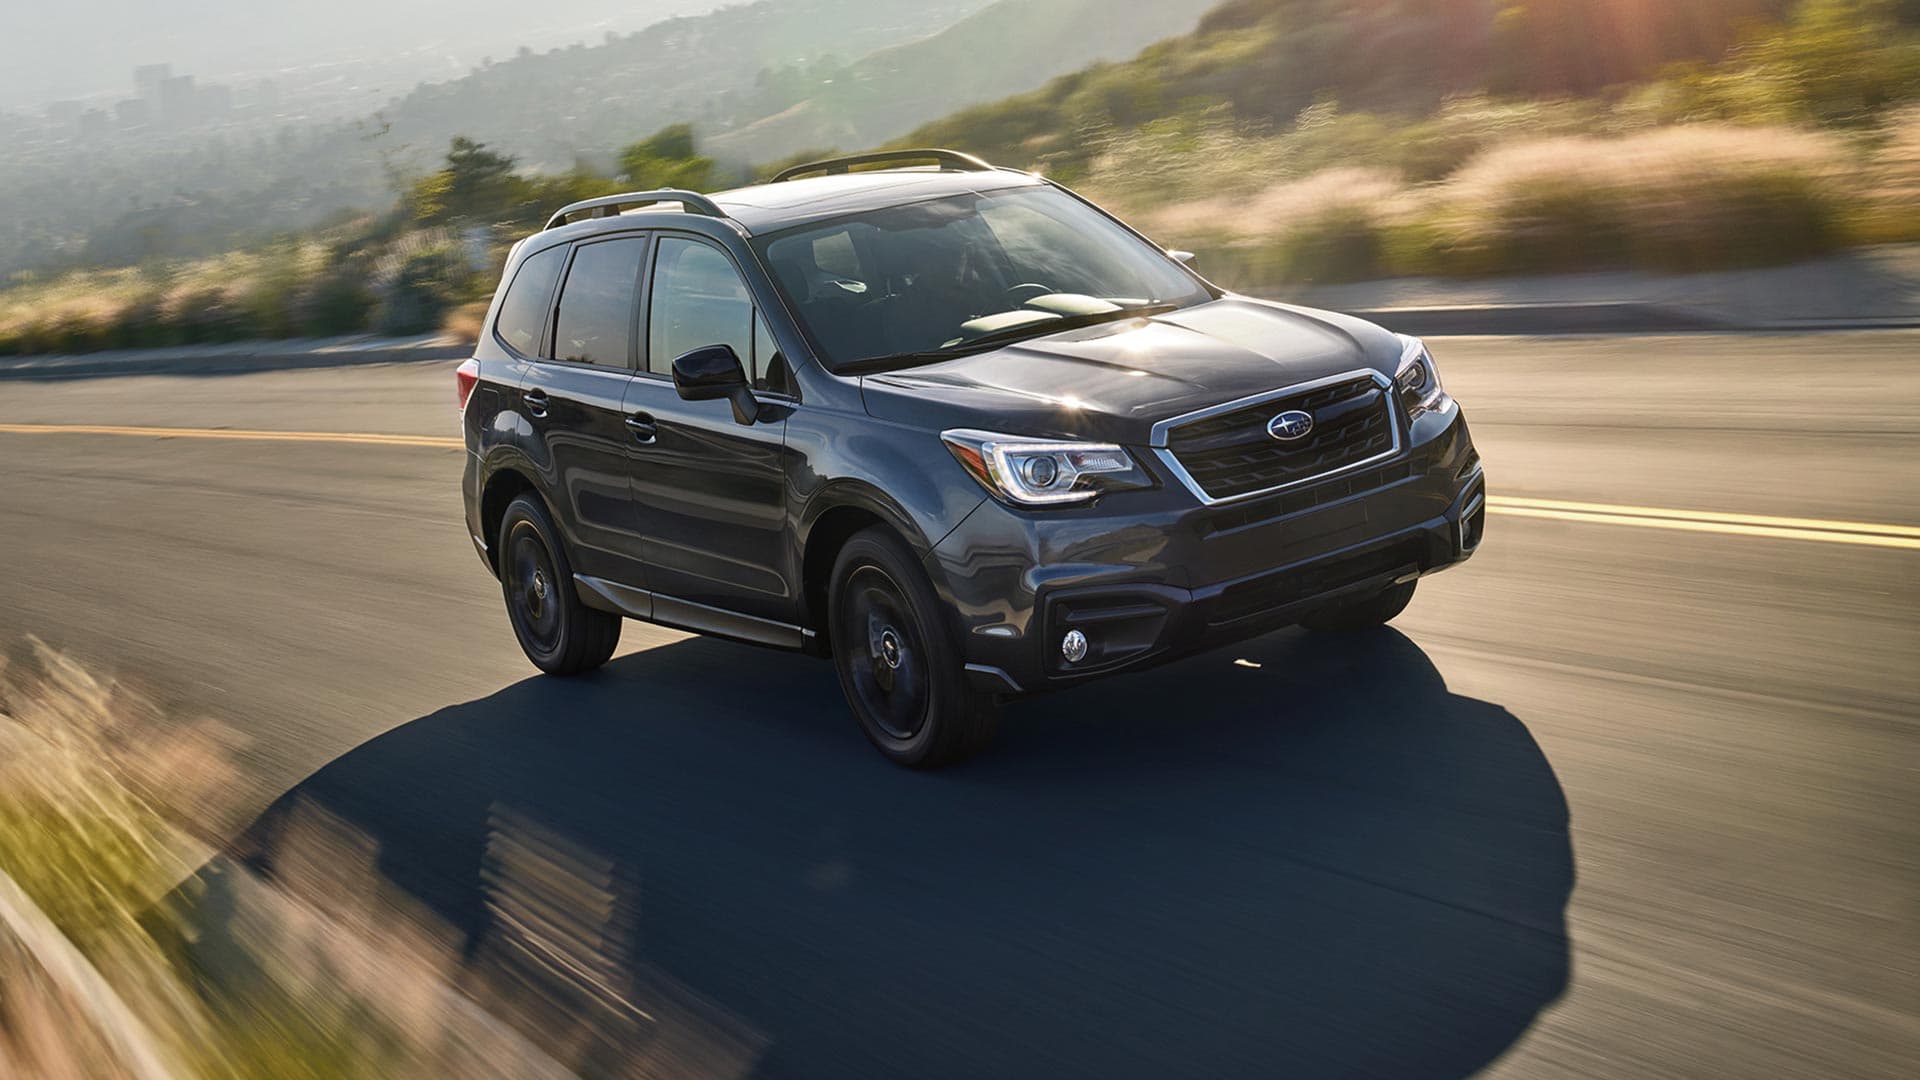 2018 Subaru Forester Will Start As Low As $22,795